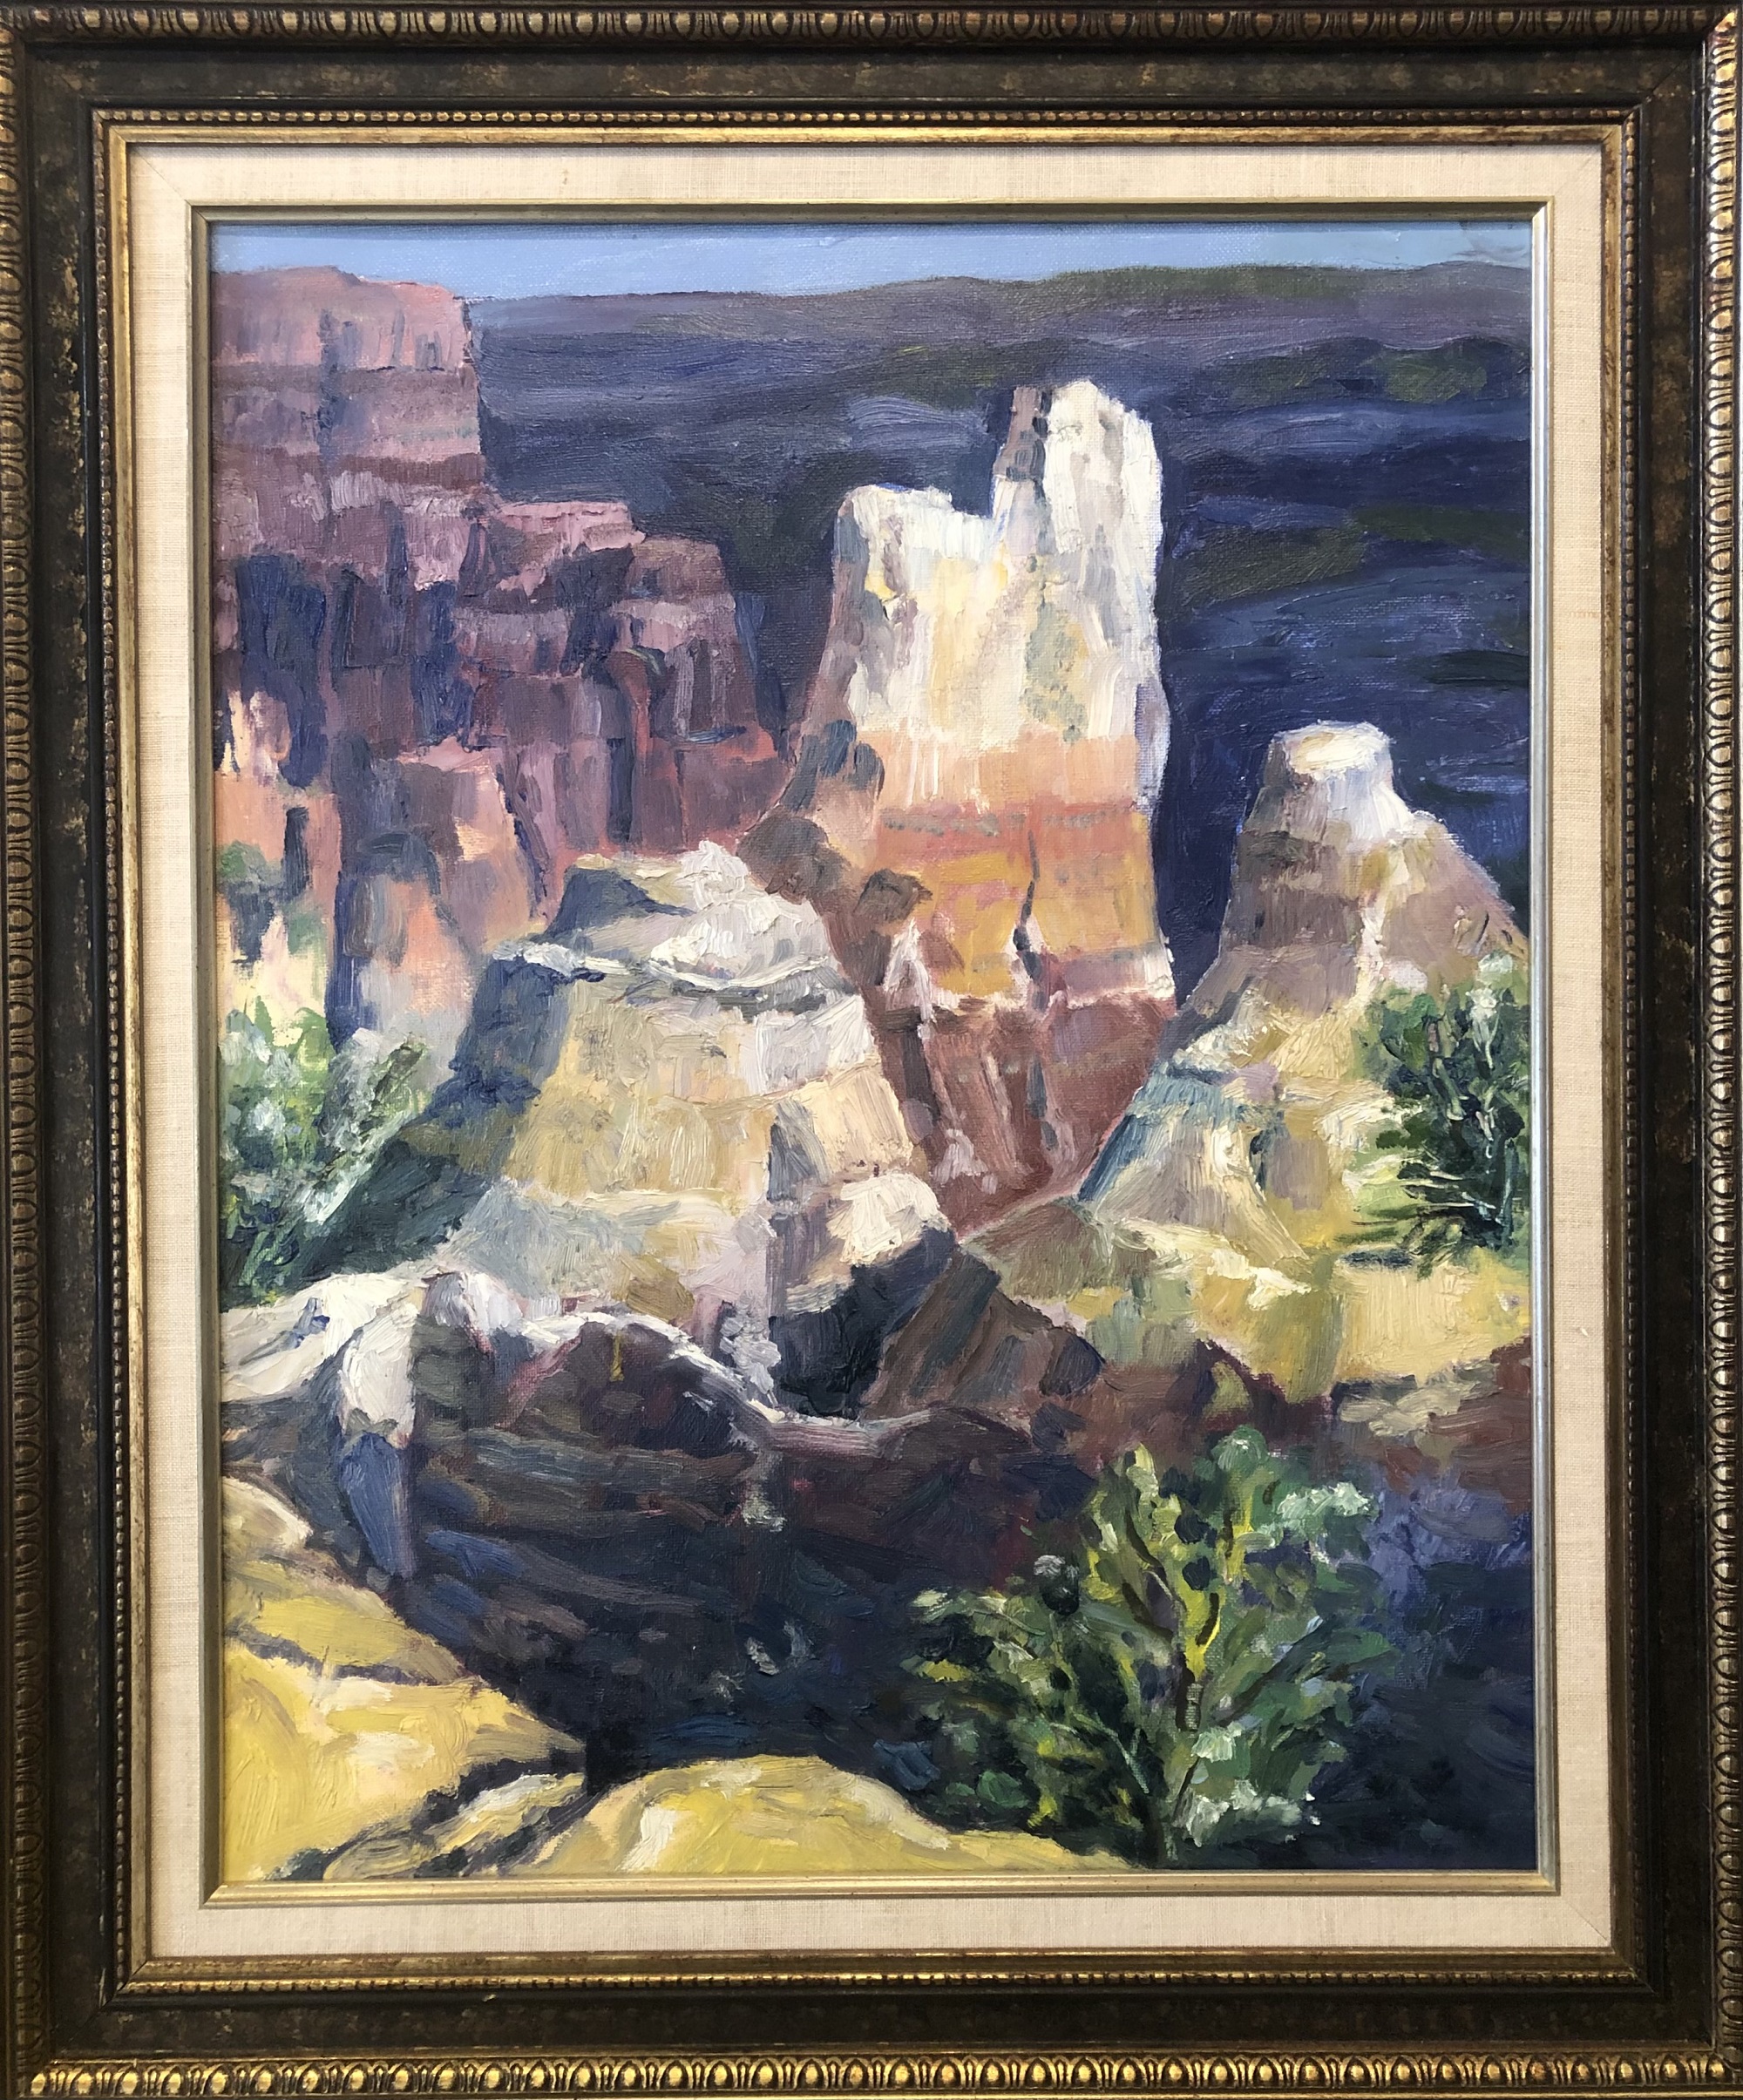 A. C. Reed, “Untitled (Canyon Landscape)”, oil on canvas